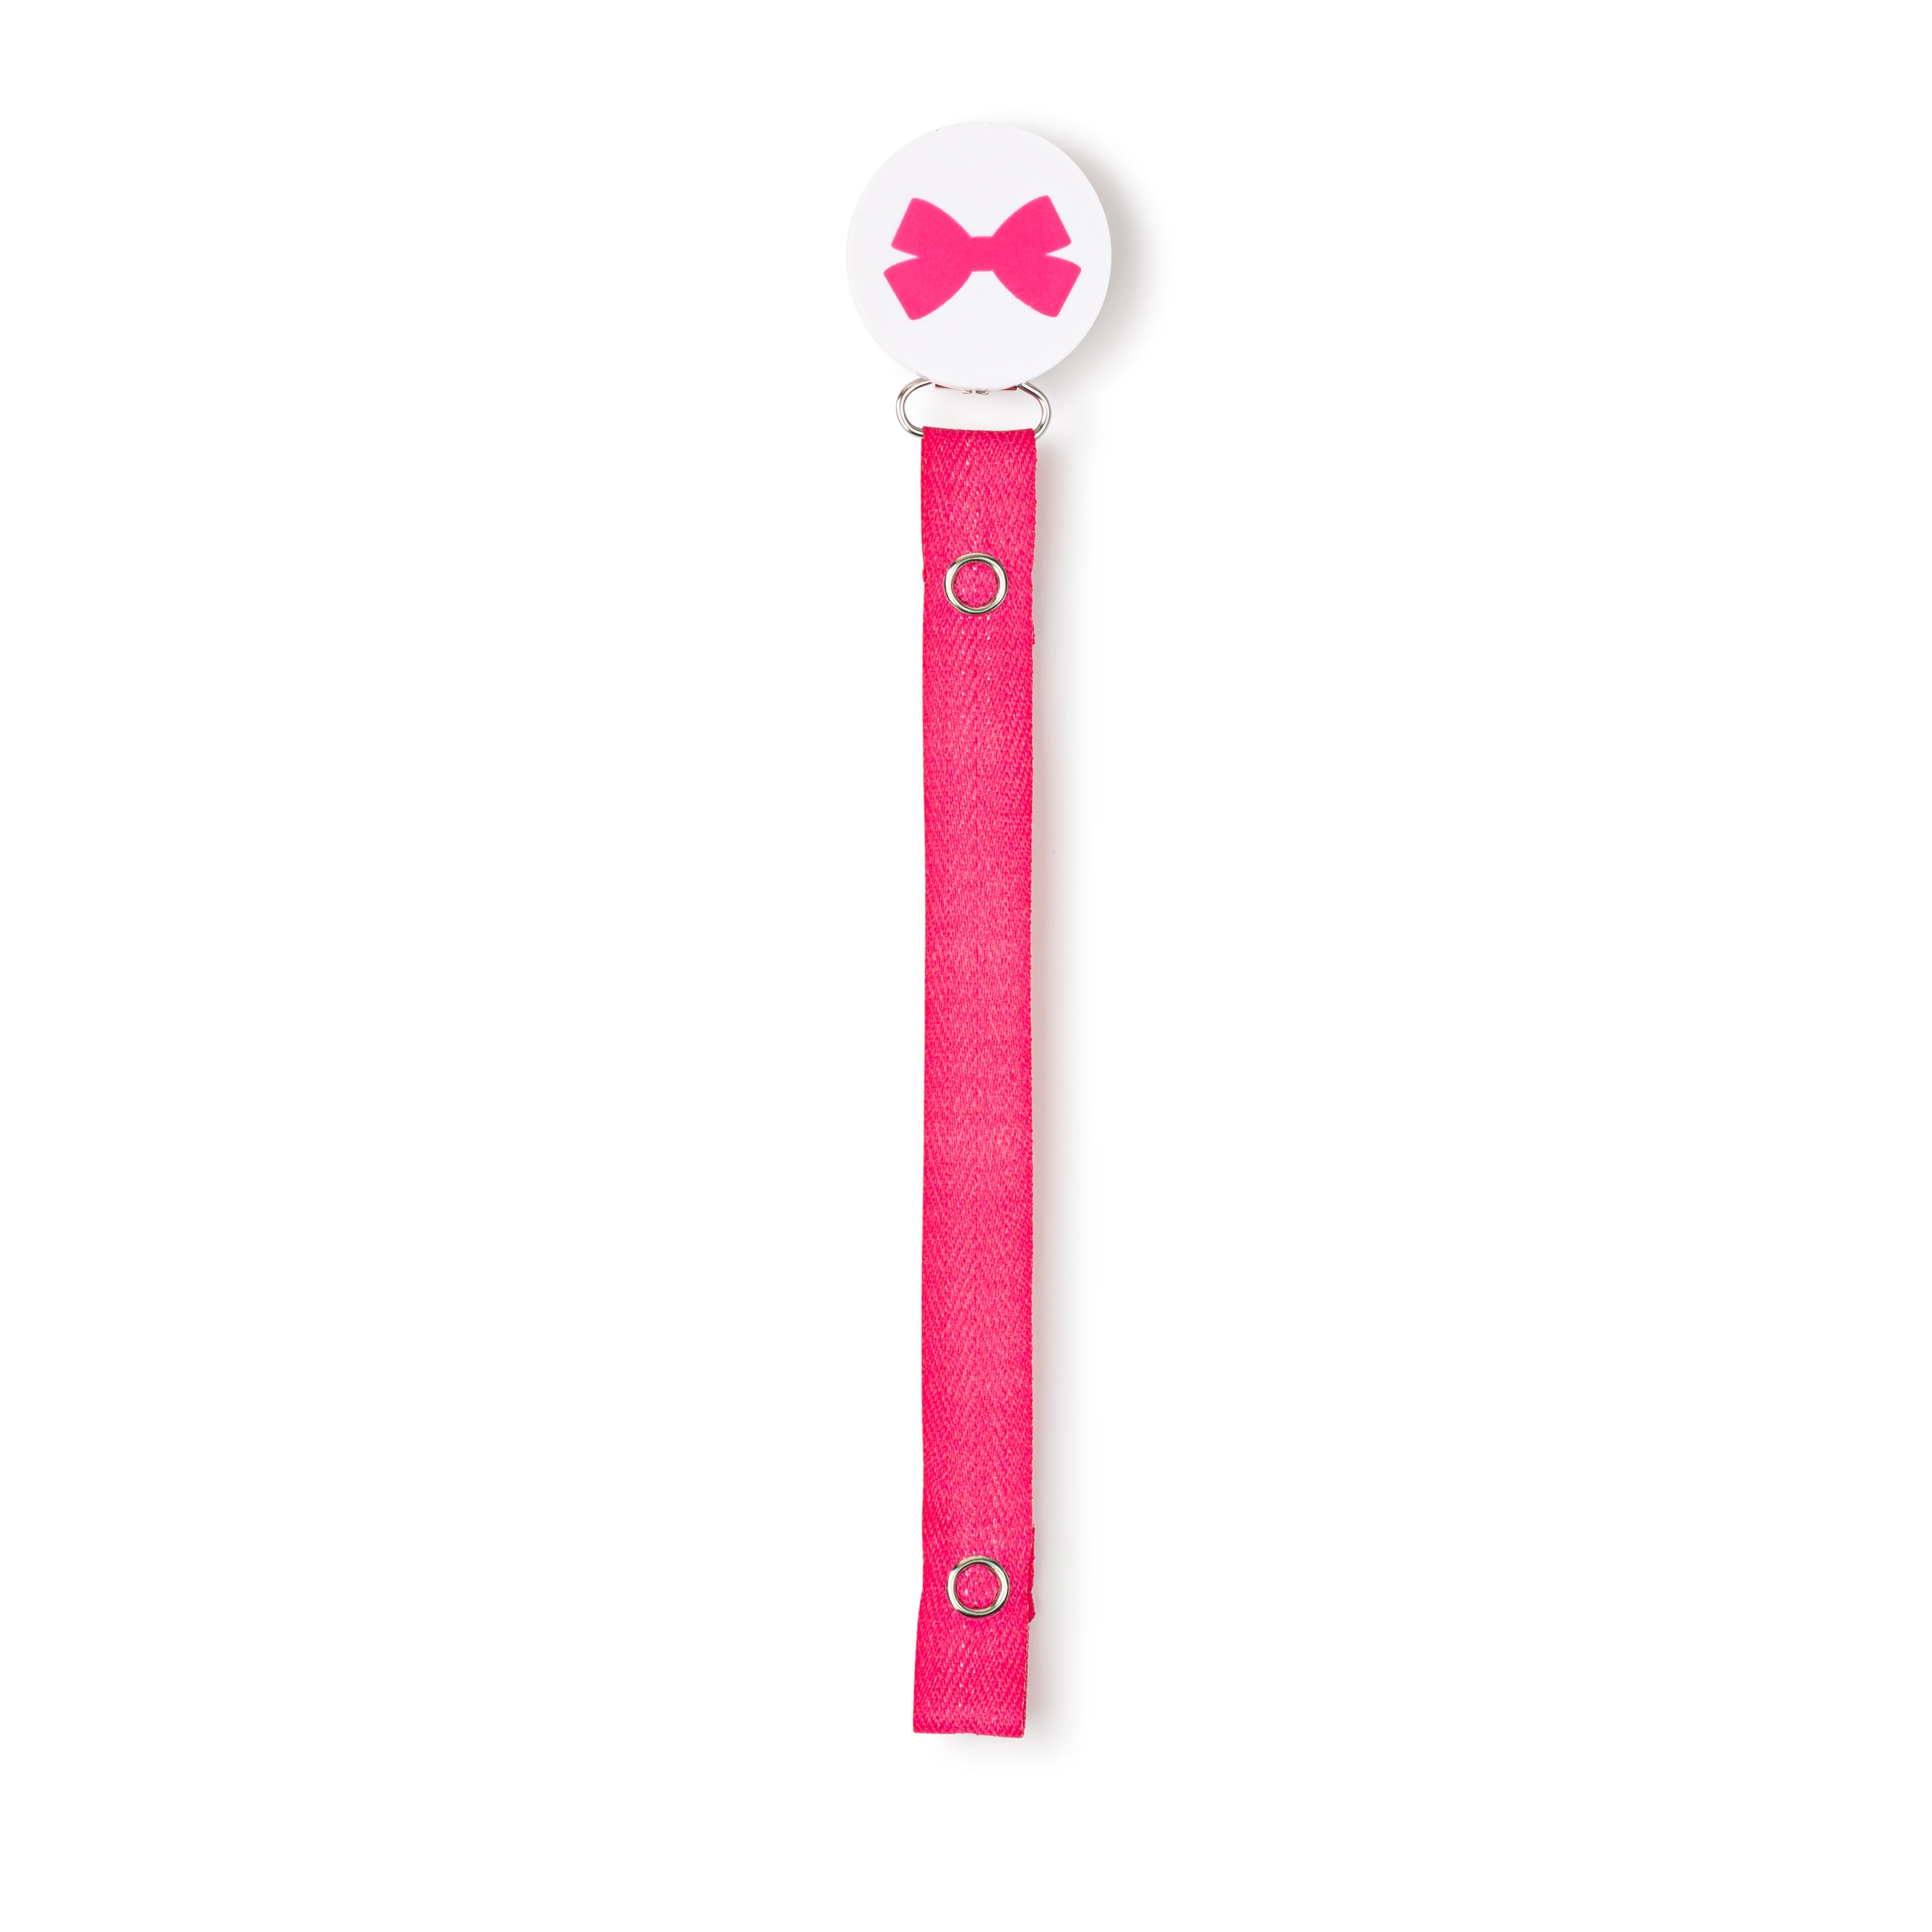 Classy Paci Hot pink bow on white clip with Bibs Pacifier GIFT SET